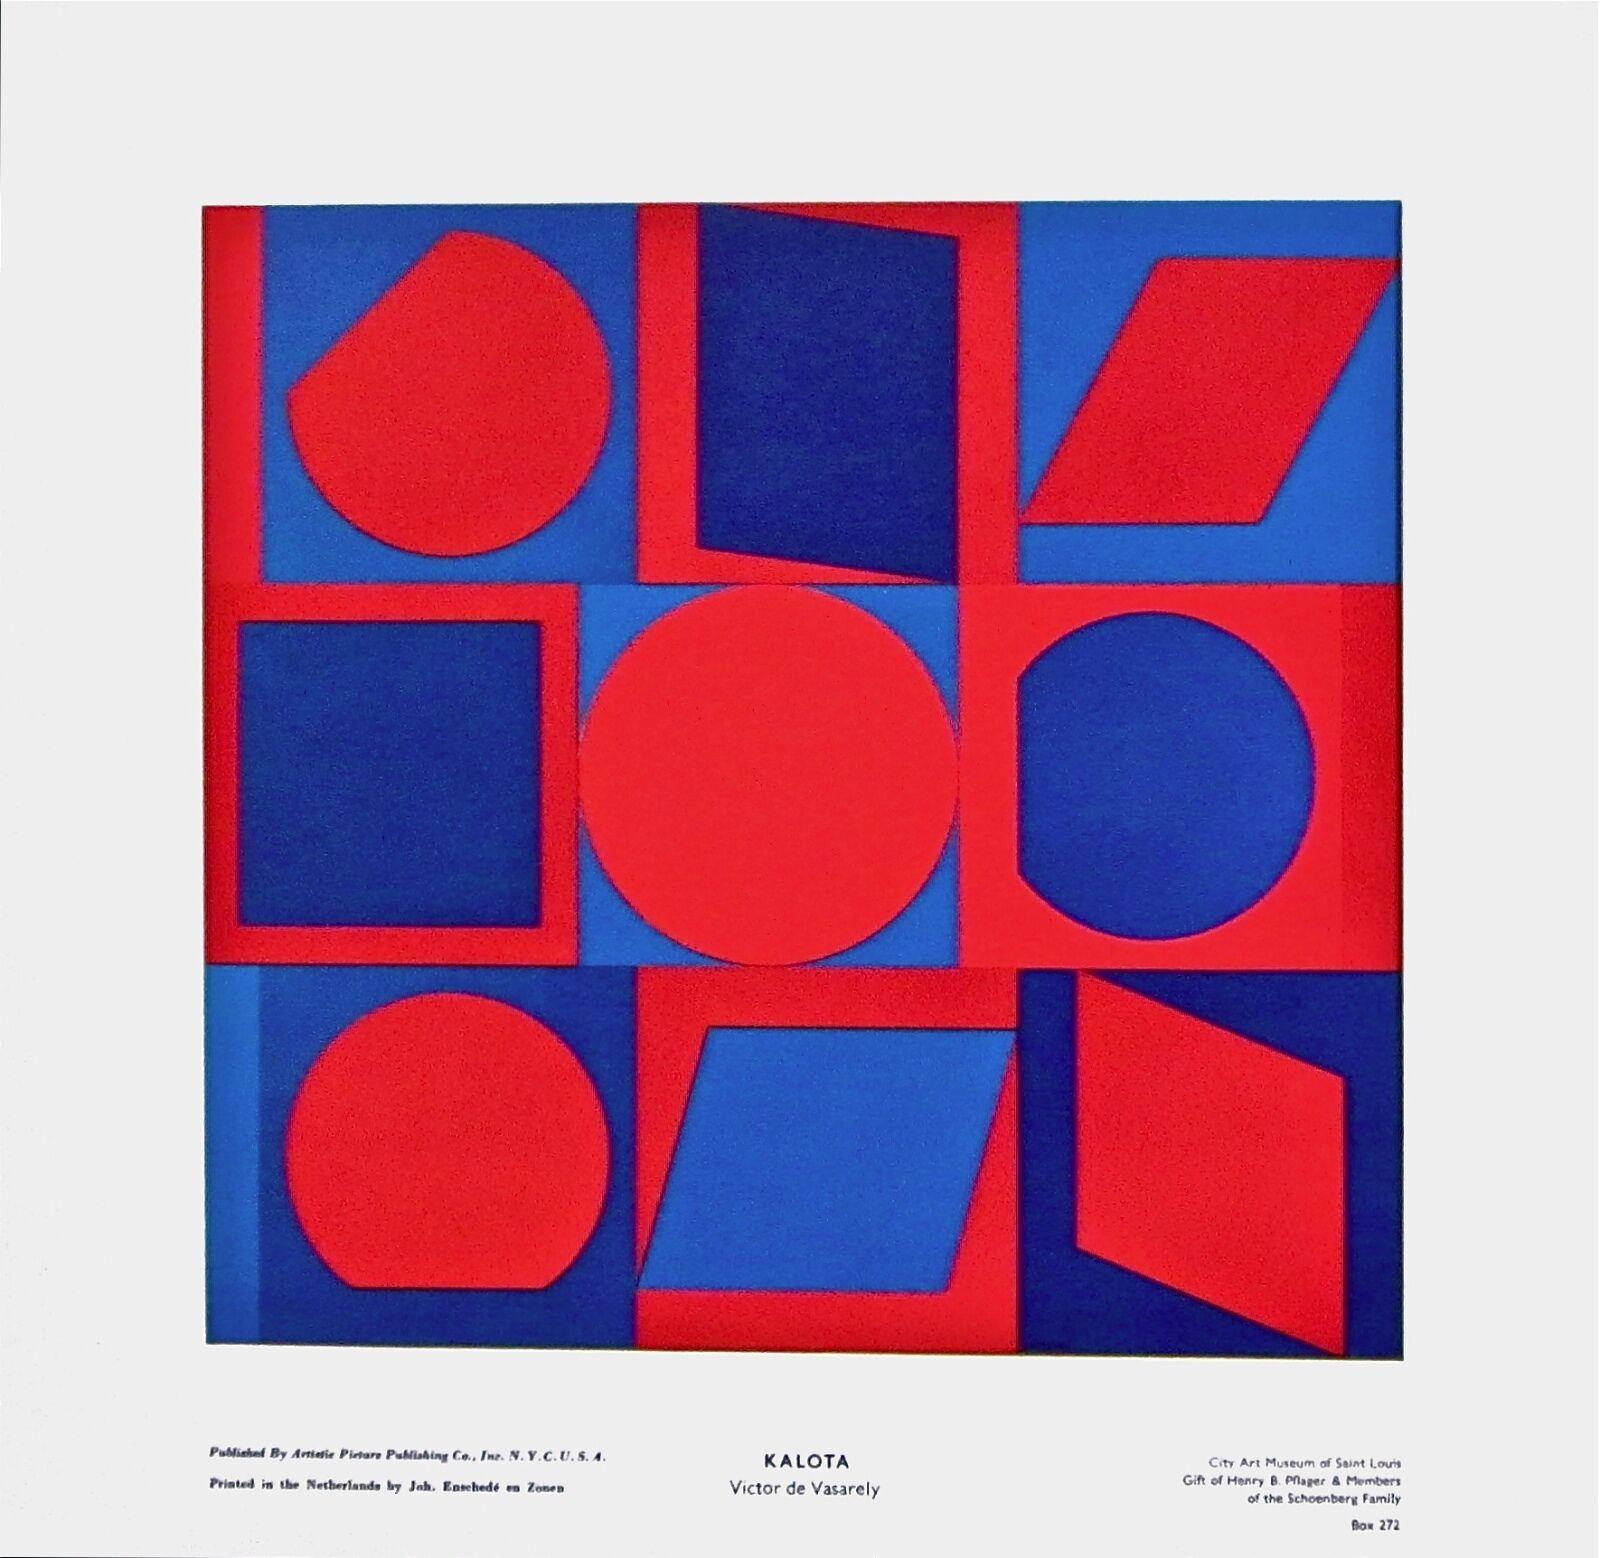 Victor Vasarely Abstract Print - KALOTA, 1970s Exhibition Poster